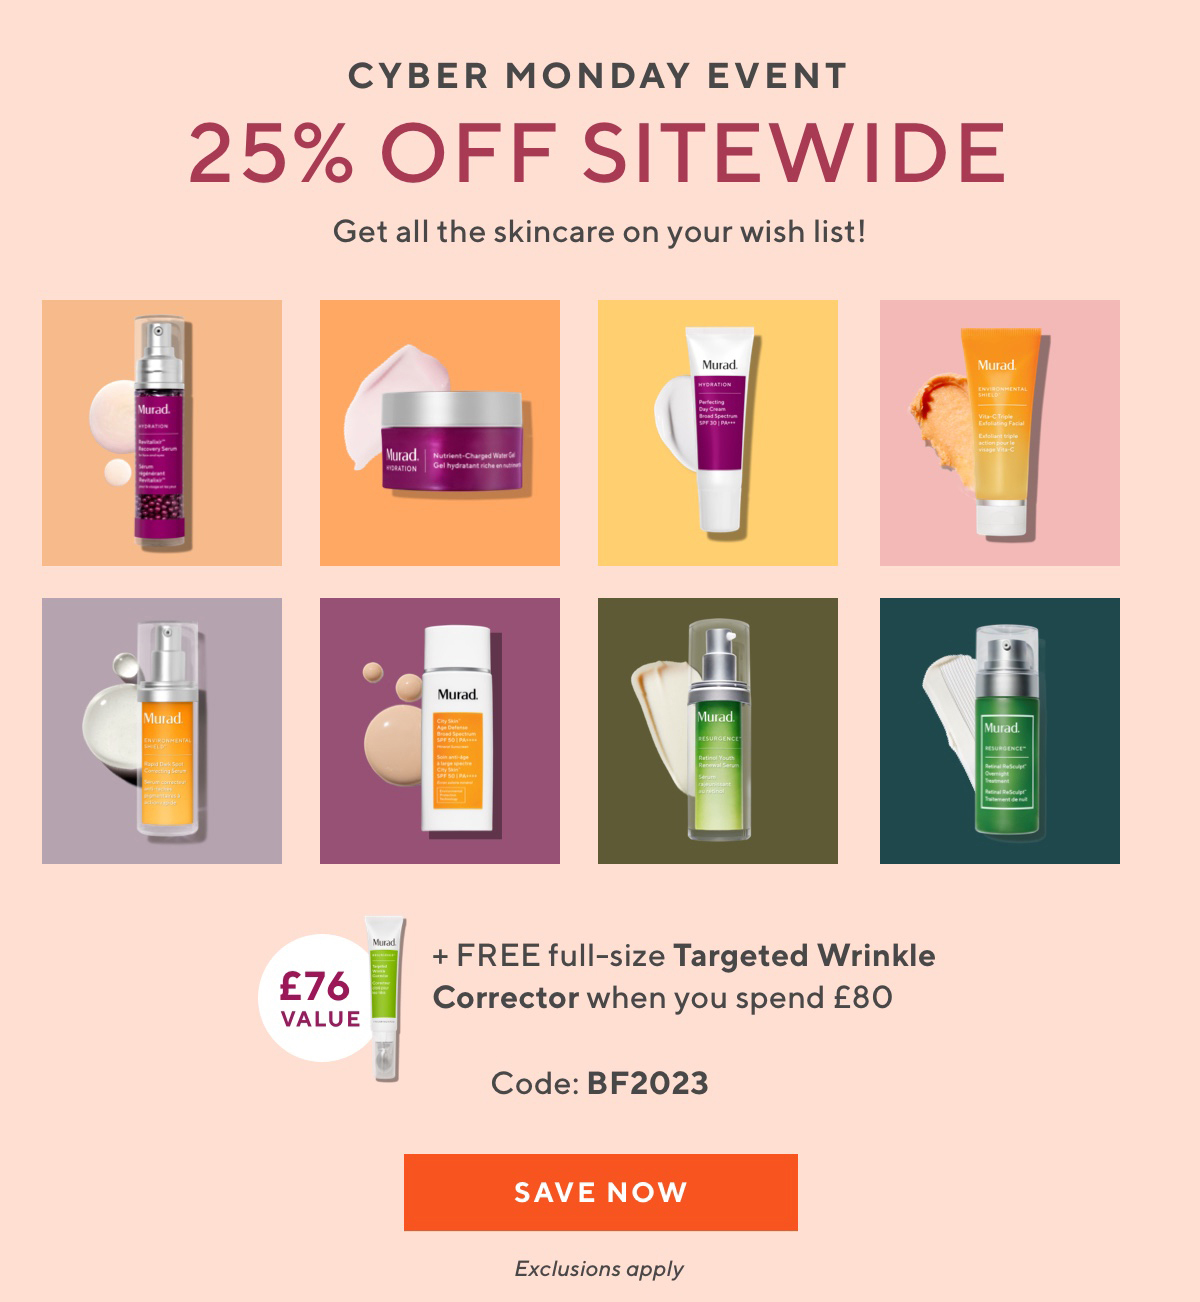 25% off sitewide at Murad + free full-size Targeted Wrinkle Corrector (worth £76) when you spend £80